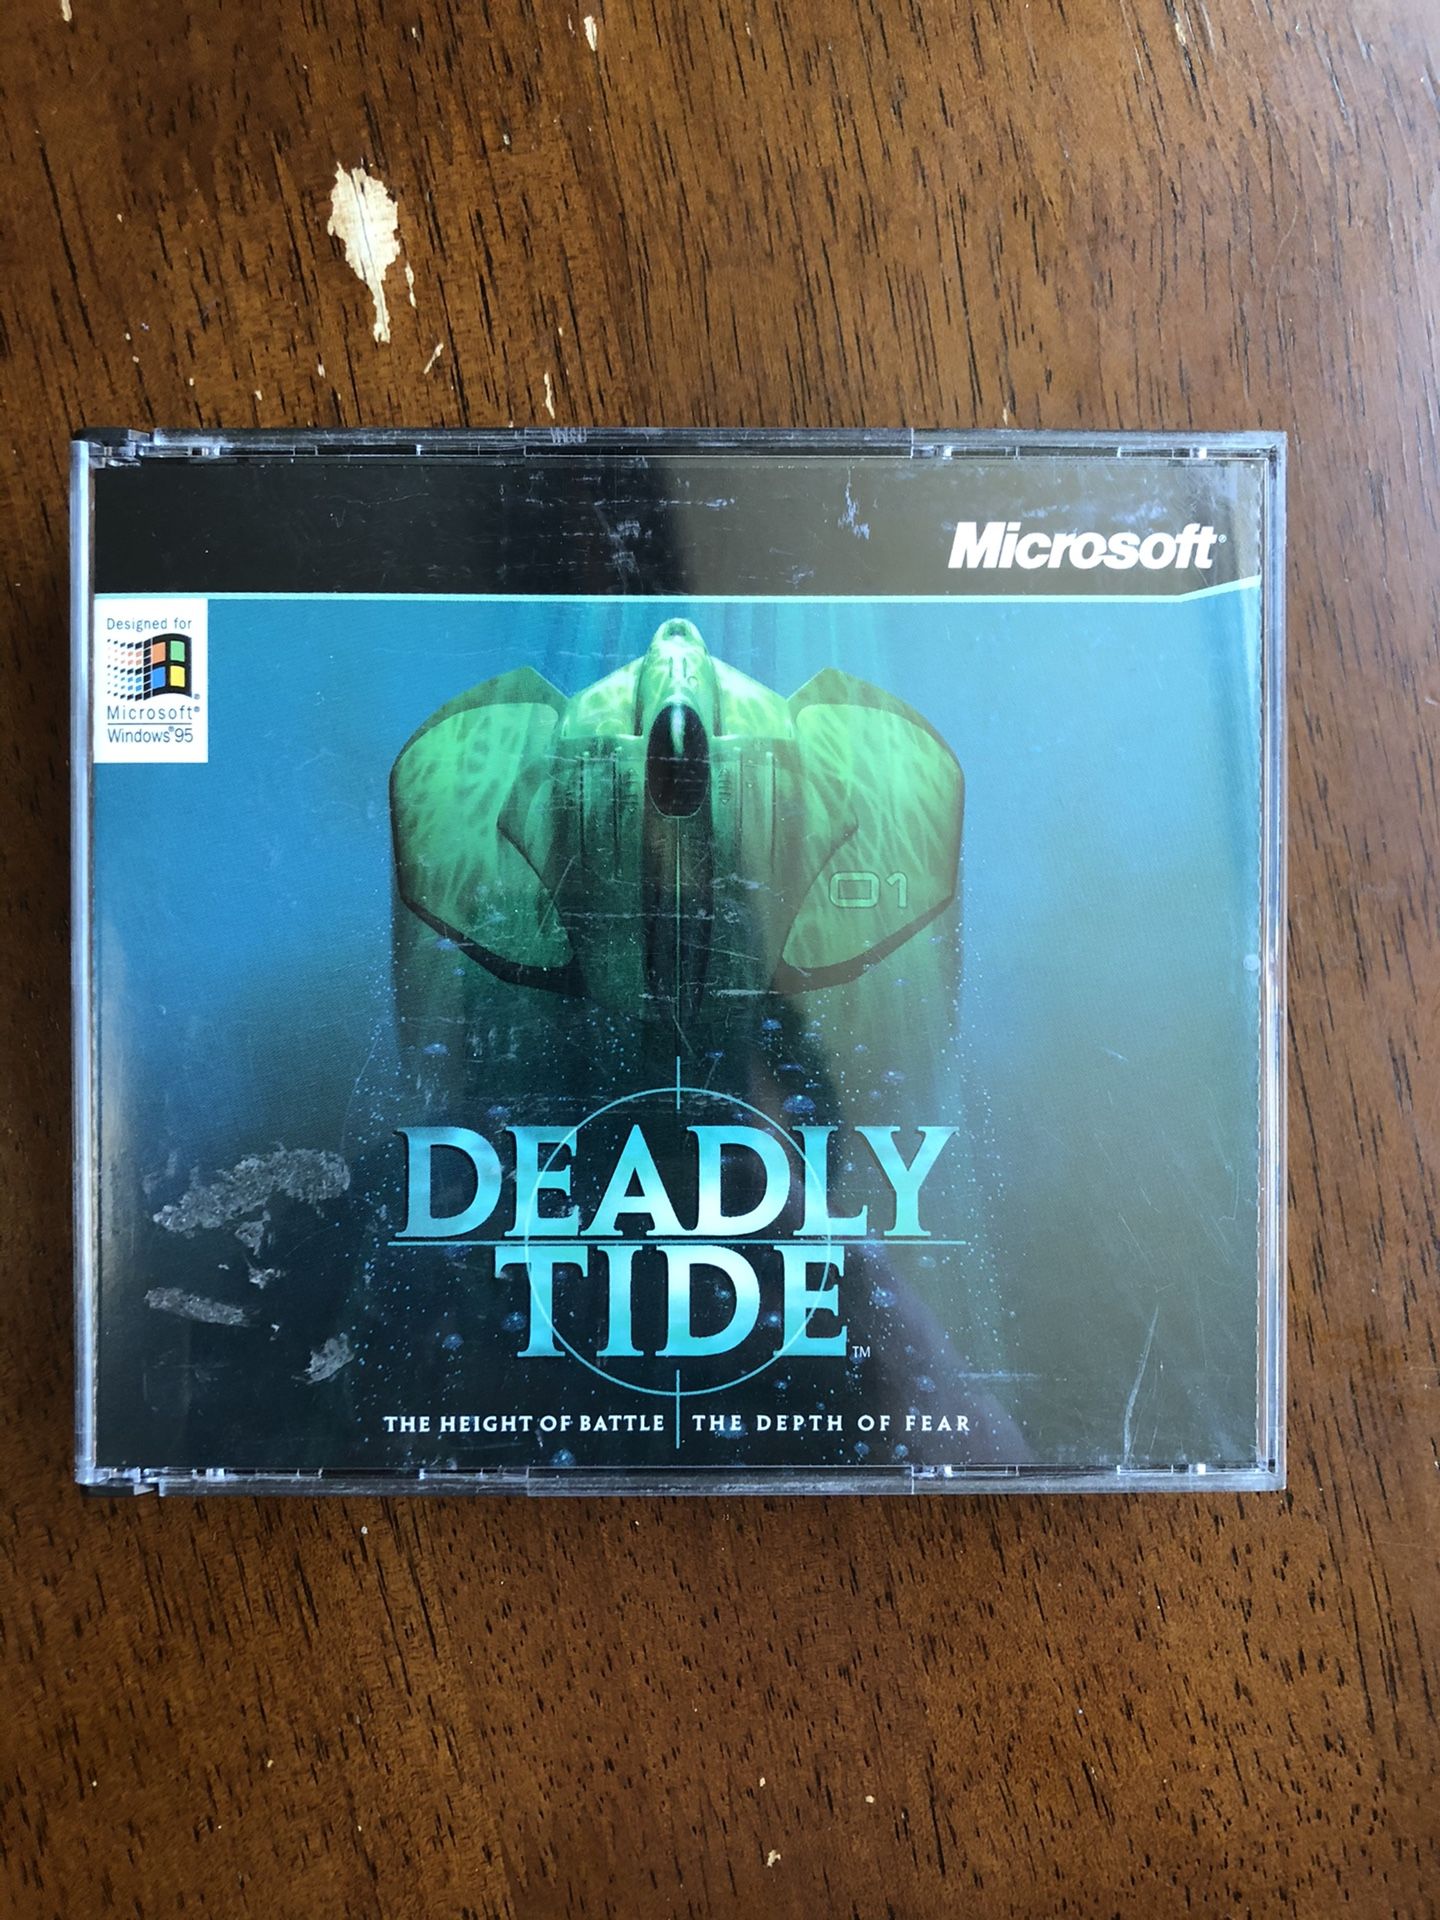 Deadly Tide (1996) Windows 95 PC CD-ROM Game Complete W/ Key, Manual & 4 Discs!